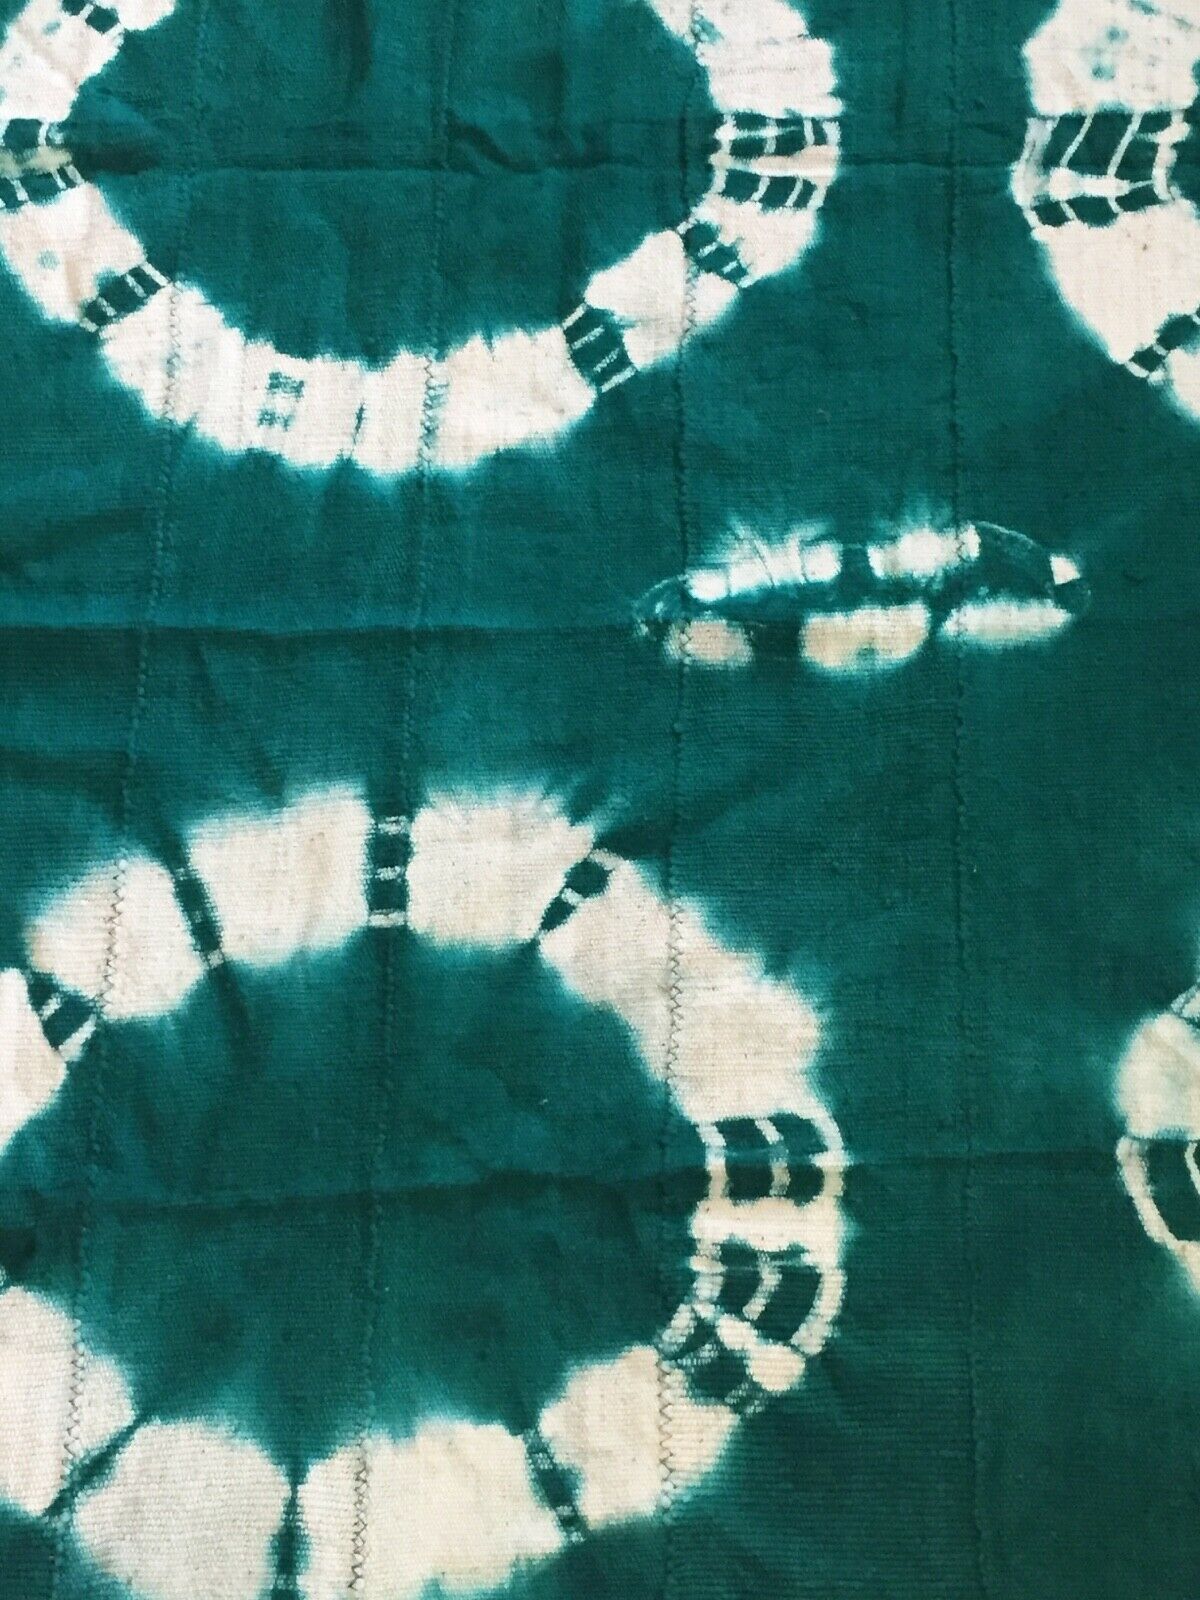 African Emerald Green & White Mud Cloth Textile Mali 42" by 63" # 572